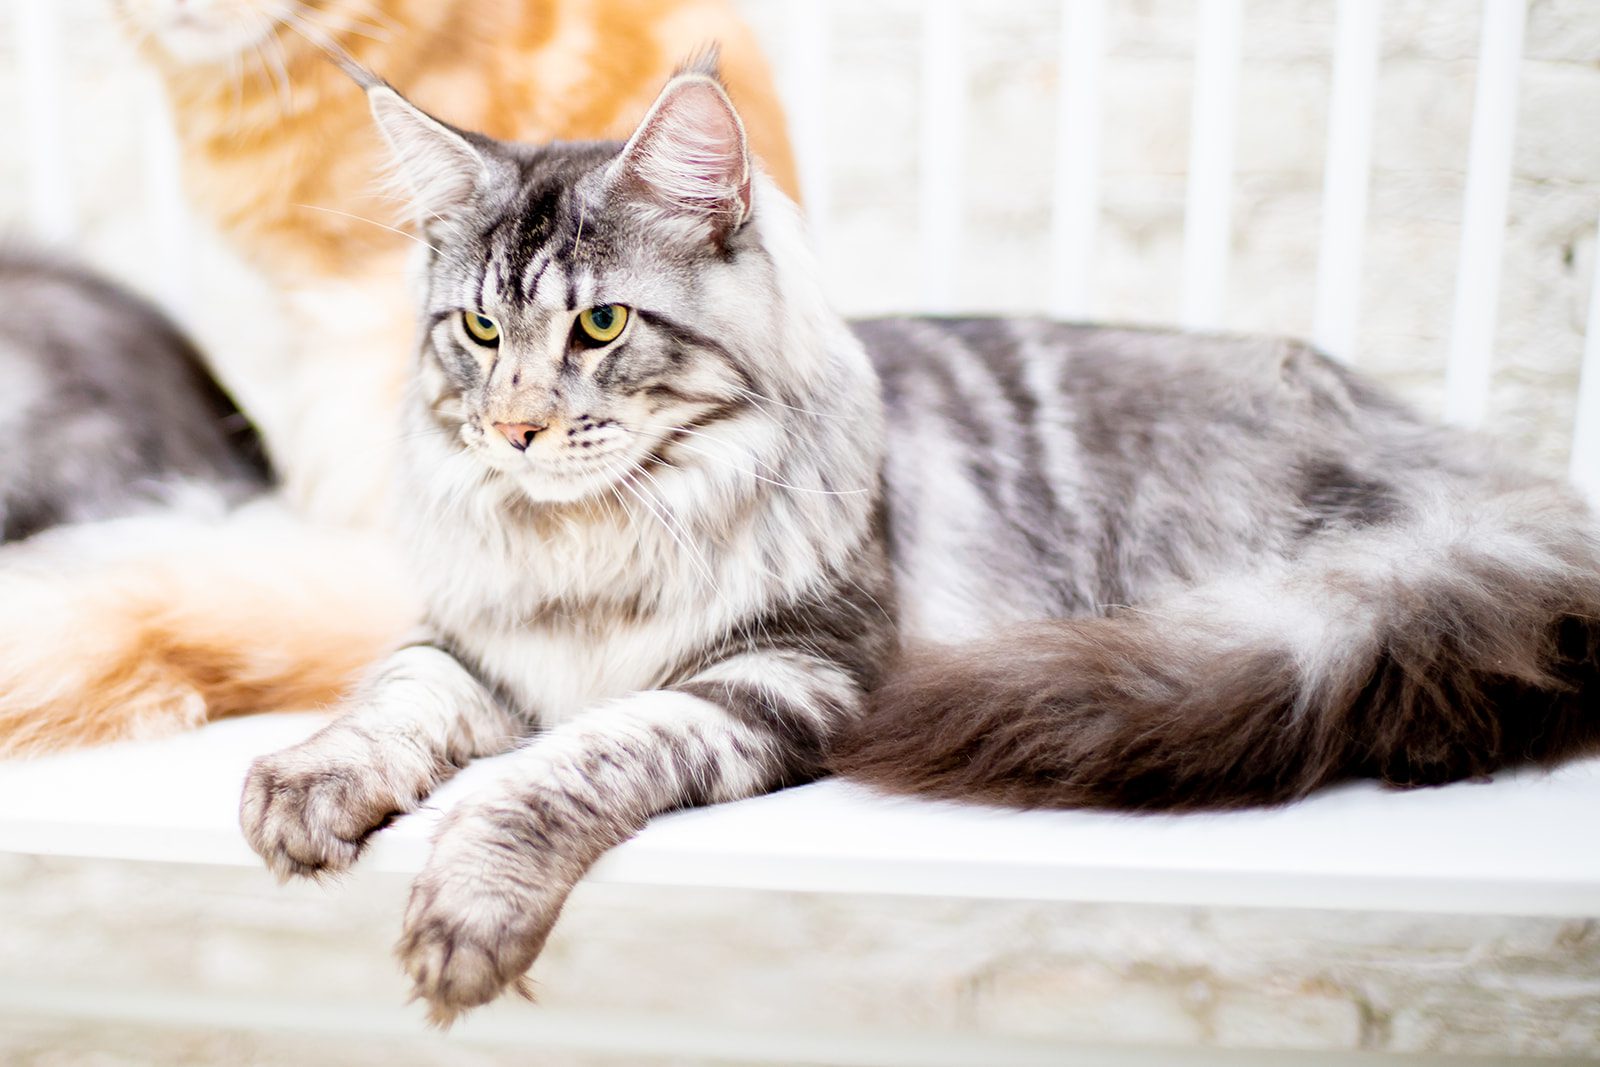 Mythic Maine Coons